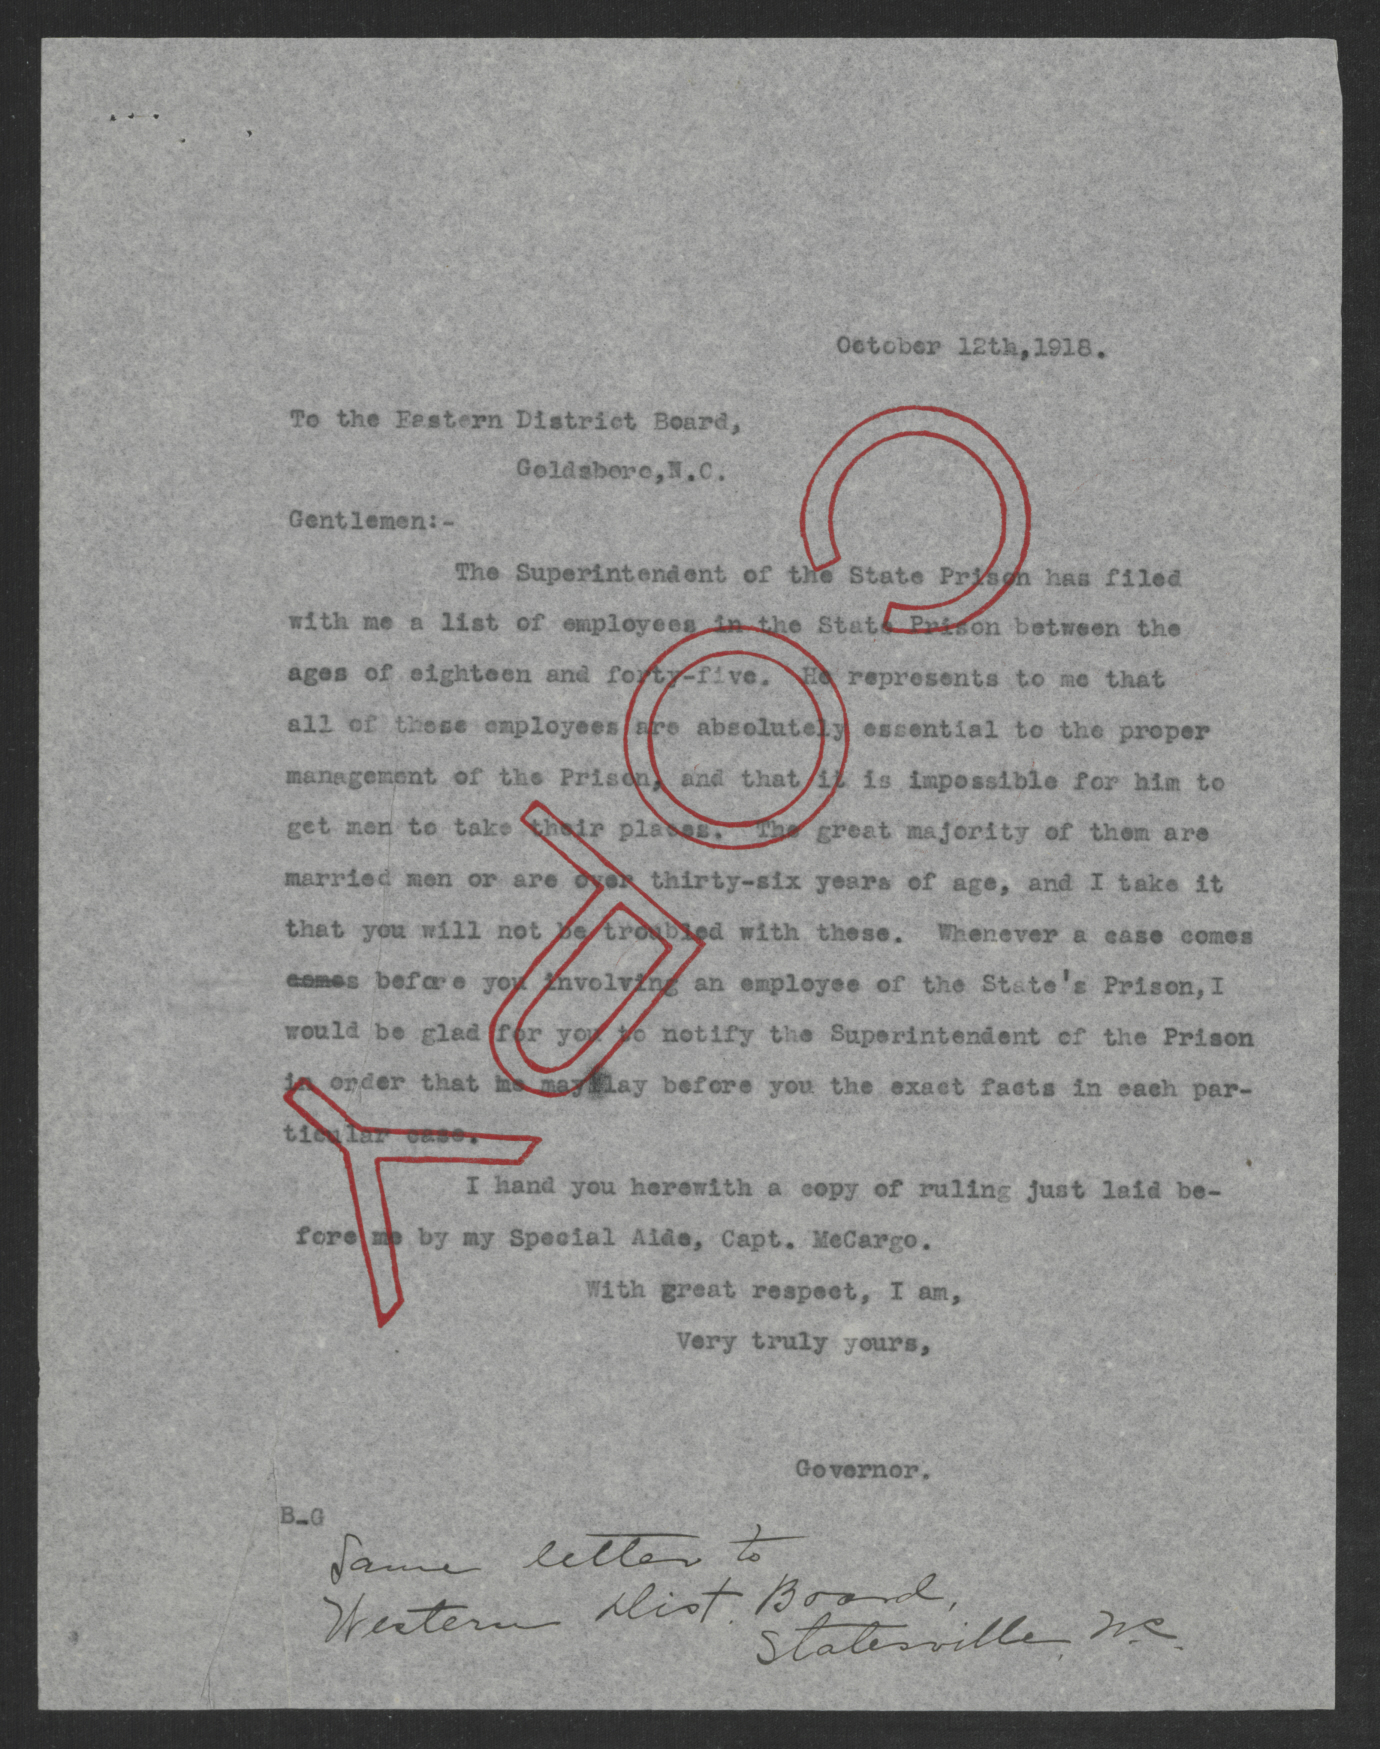 Letter from Thomas W. Bickett to the Eastern District Exemption Board, October 12, 1918